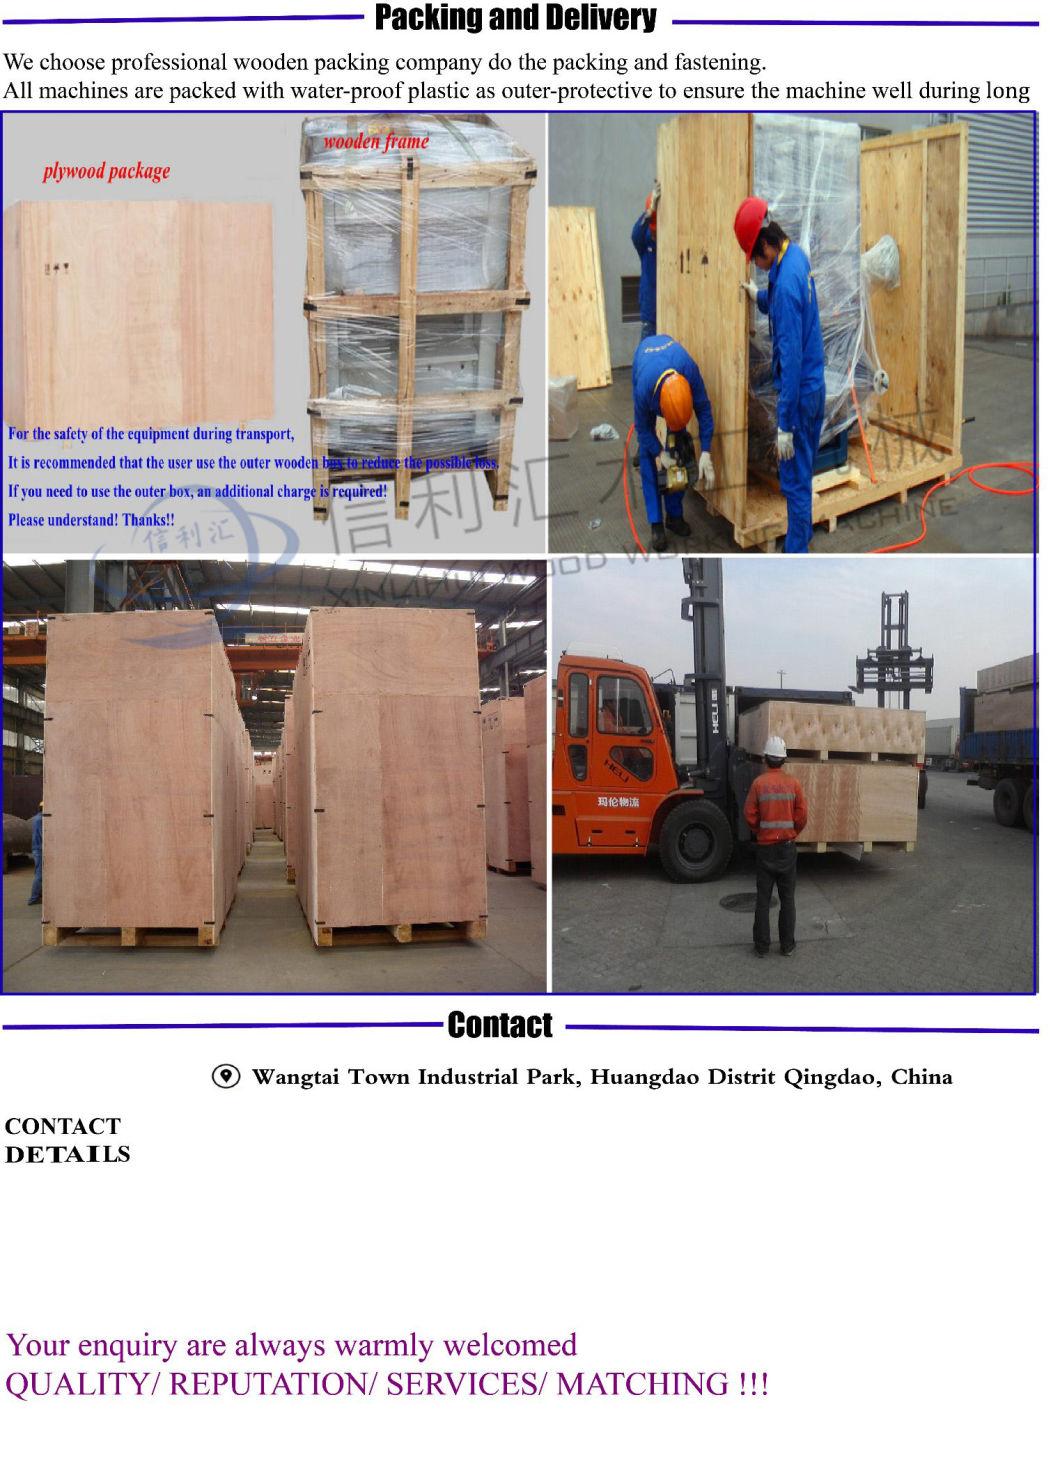 Automatic High Speed Finger Joint Plate Wood Planer Four Side Moulder High Speed Four Side Moulder/4 Side Wood Moulder